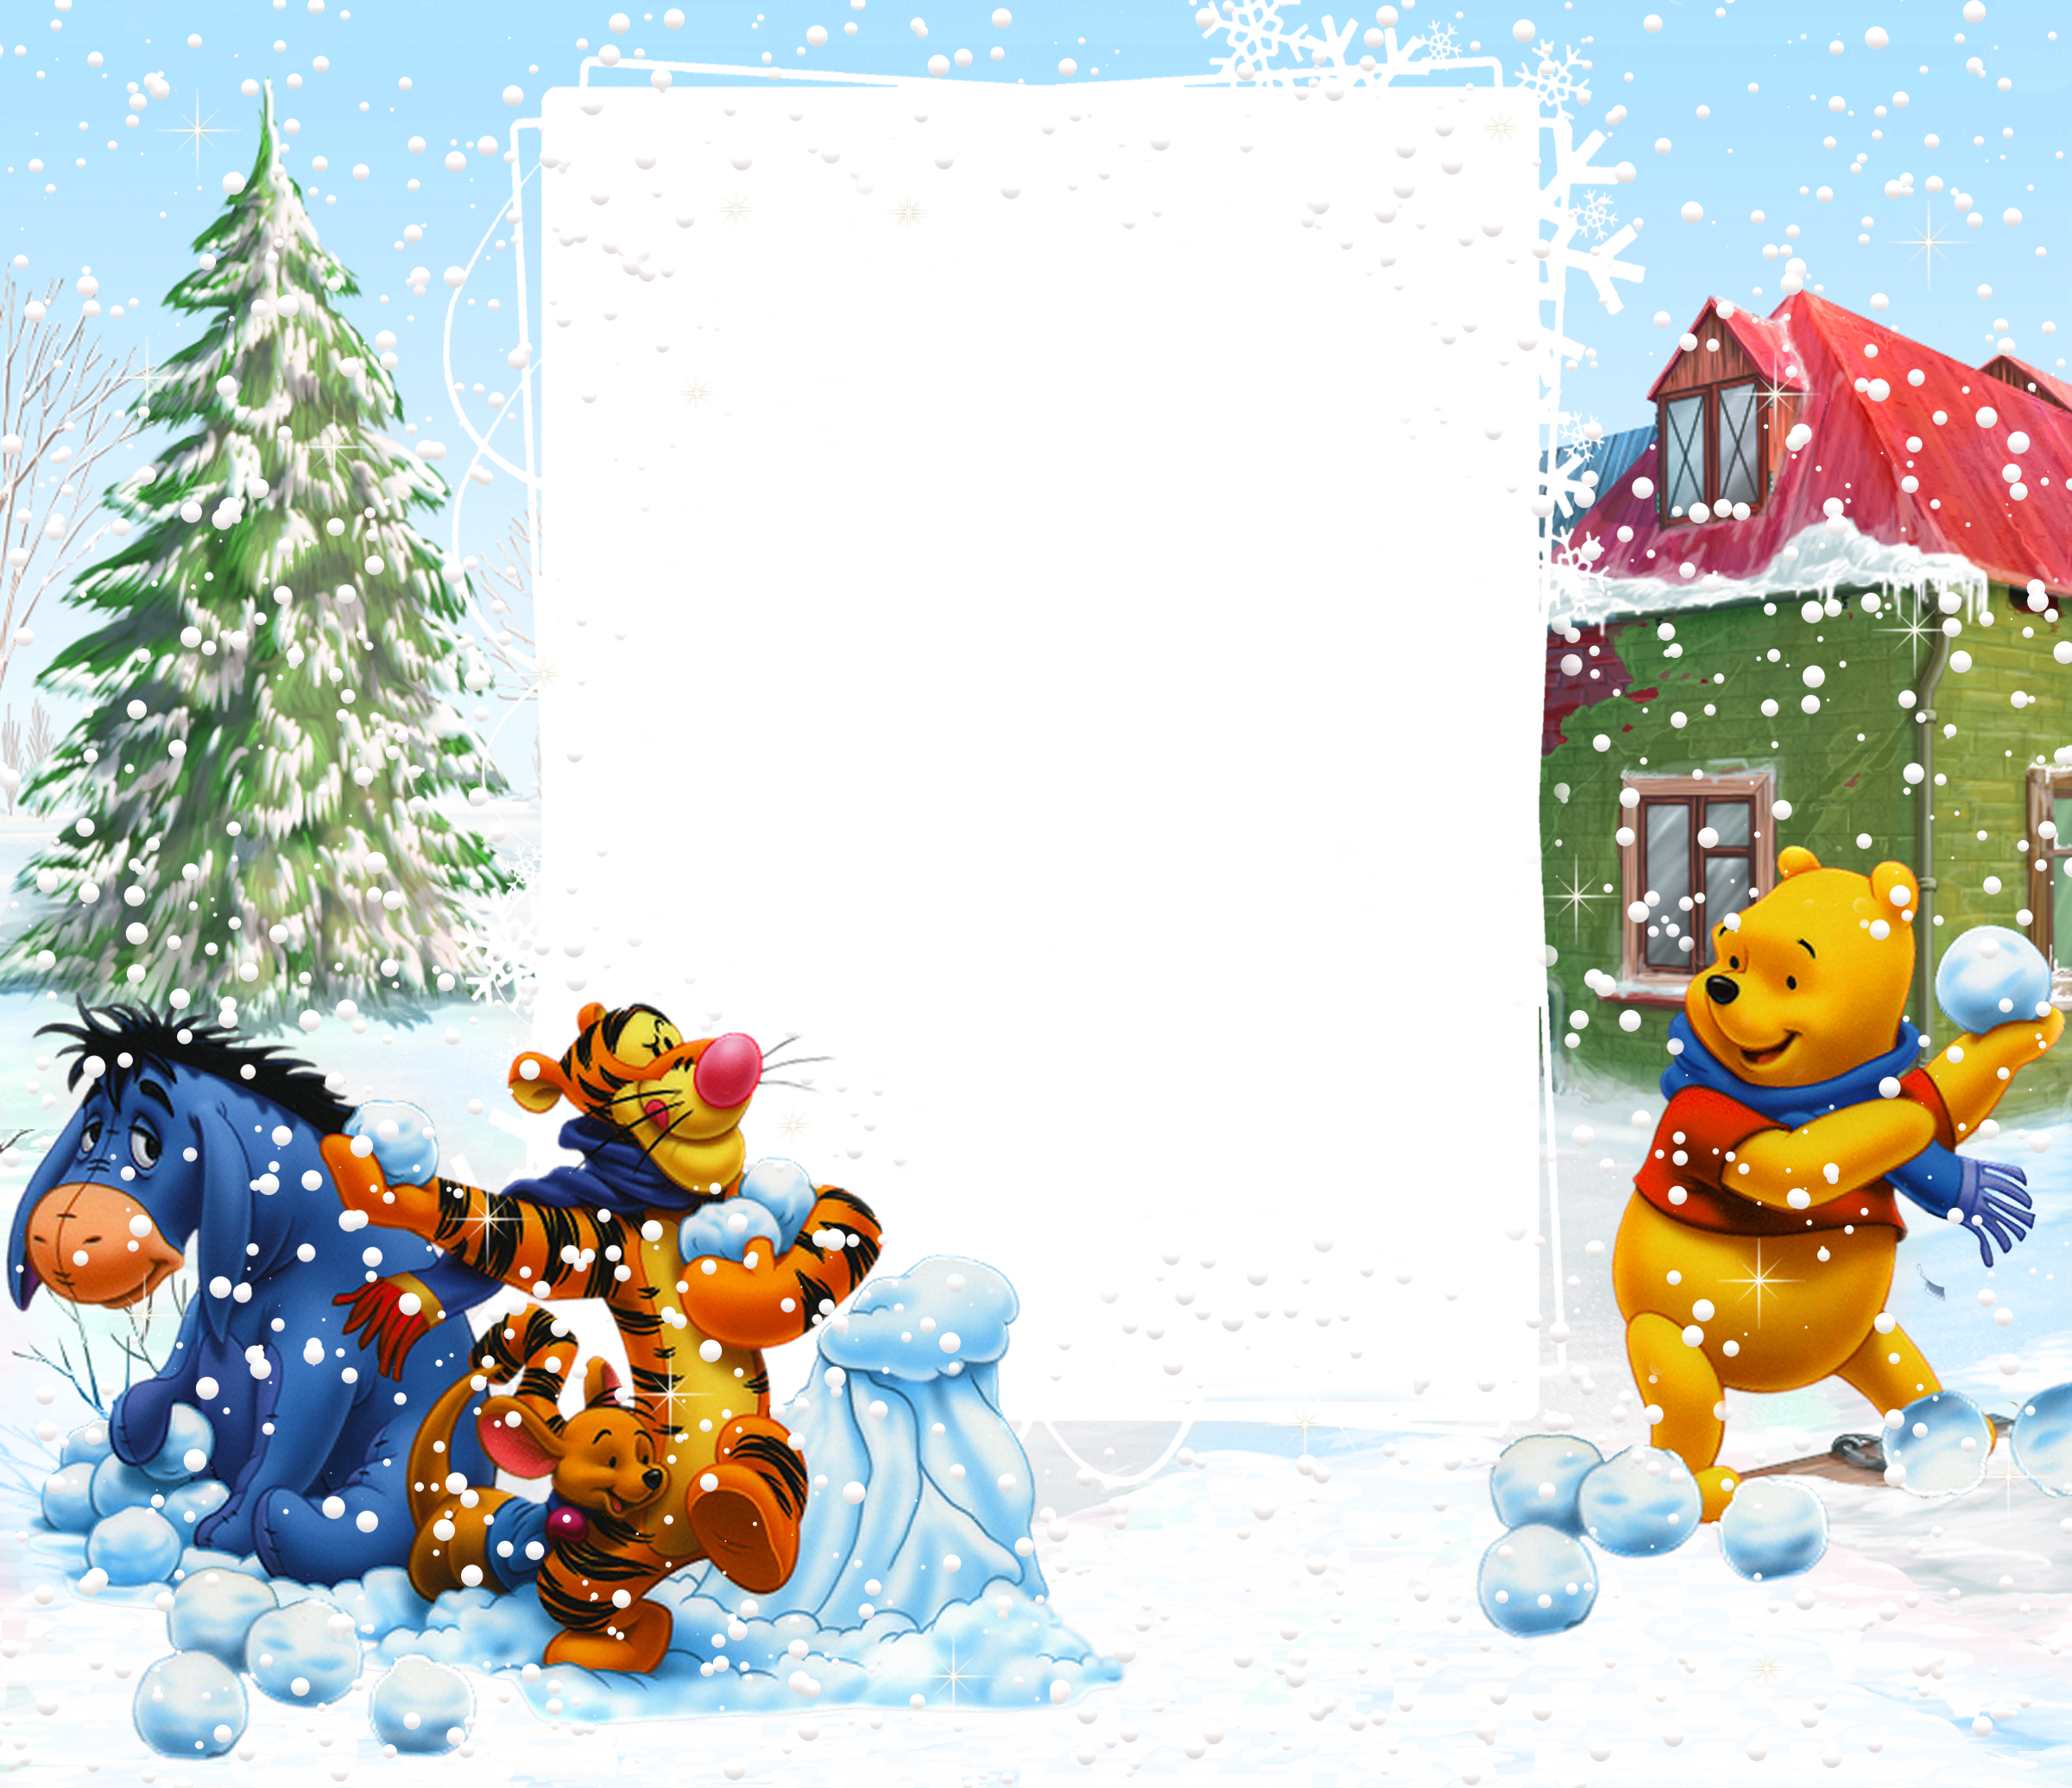 Winnie the pooh png. Clipart winter borders